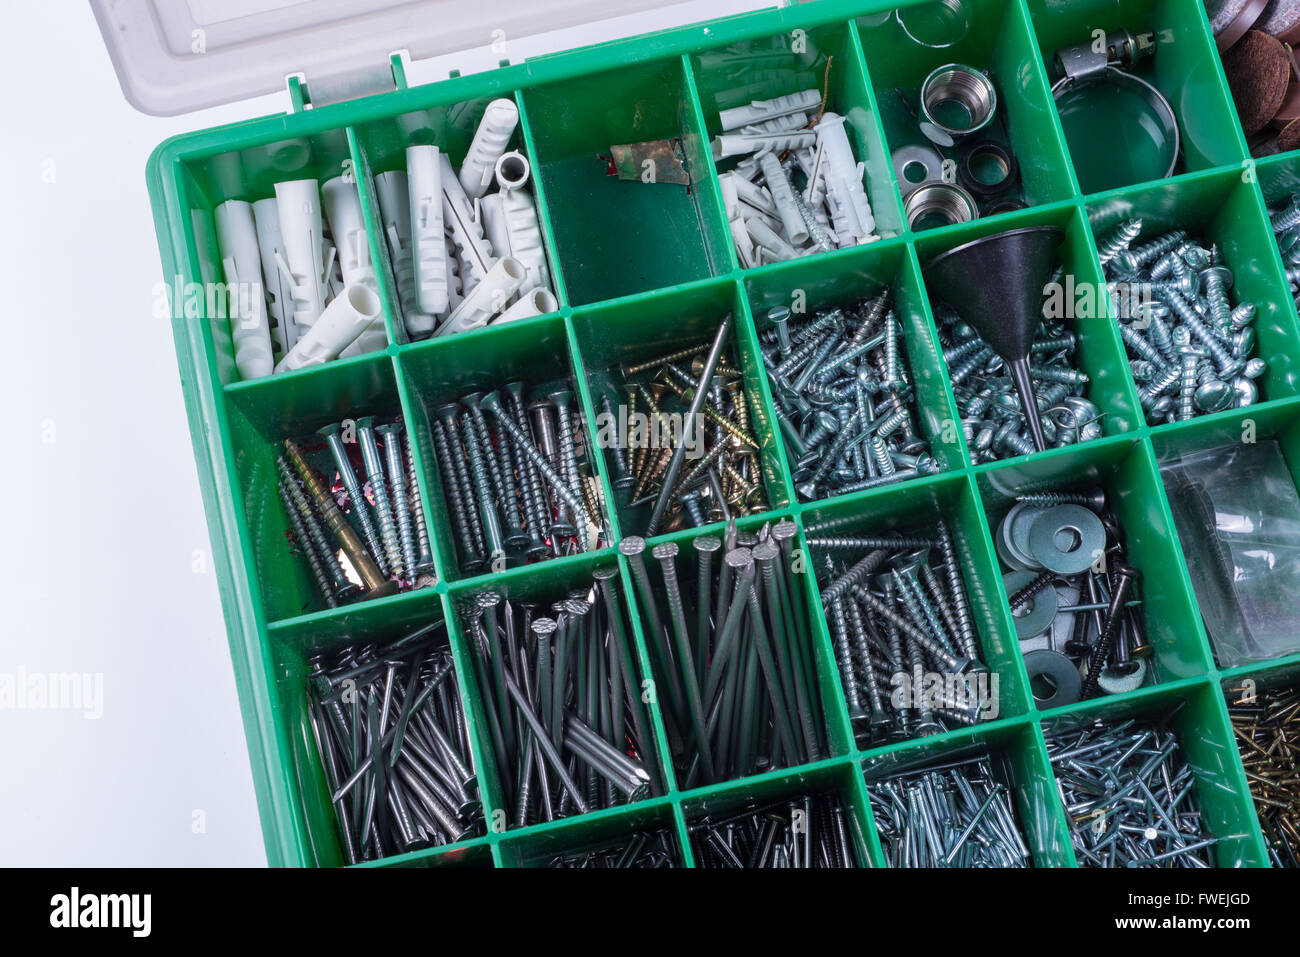 Green box with nails and screws Stock Photo